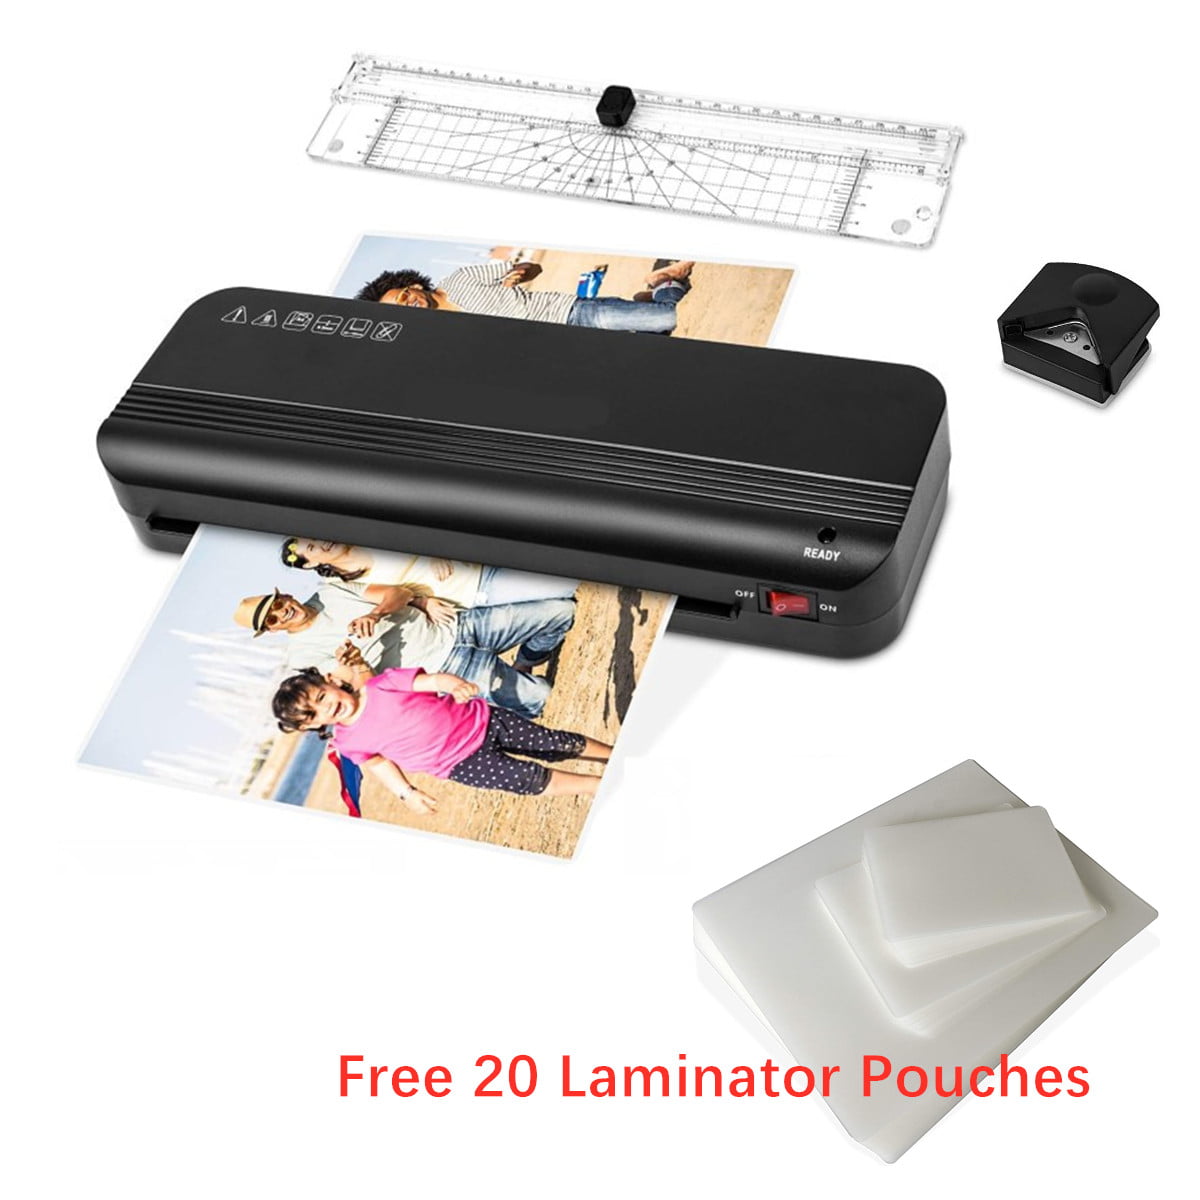 Laminator,5 in 1 A4 Thermal Laminator Machine,Quick Warm-Up,400mm/min Laminating Speed,Hot Cold Laminator with 30 Laminating Pouches,Paper Trimmer,Corner Rounder,Photo Clip Kit,for Home Office School 